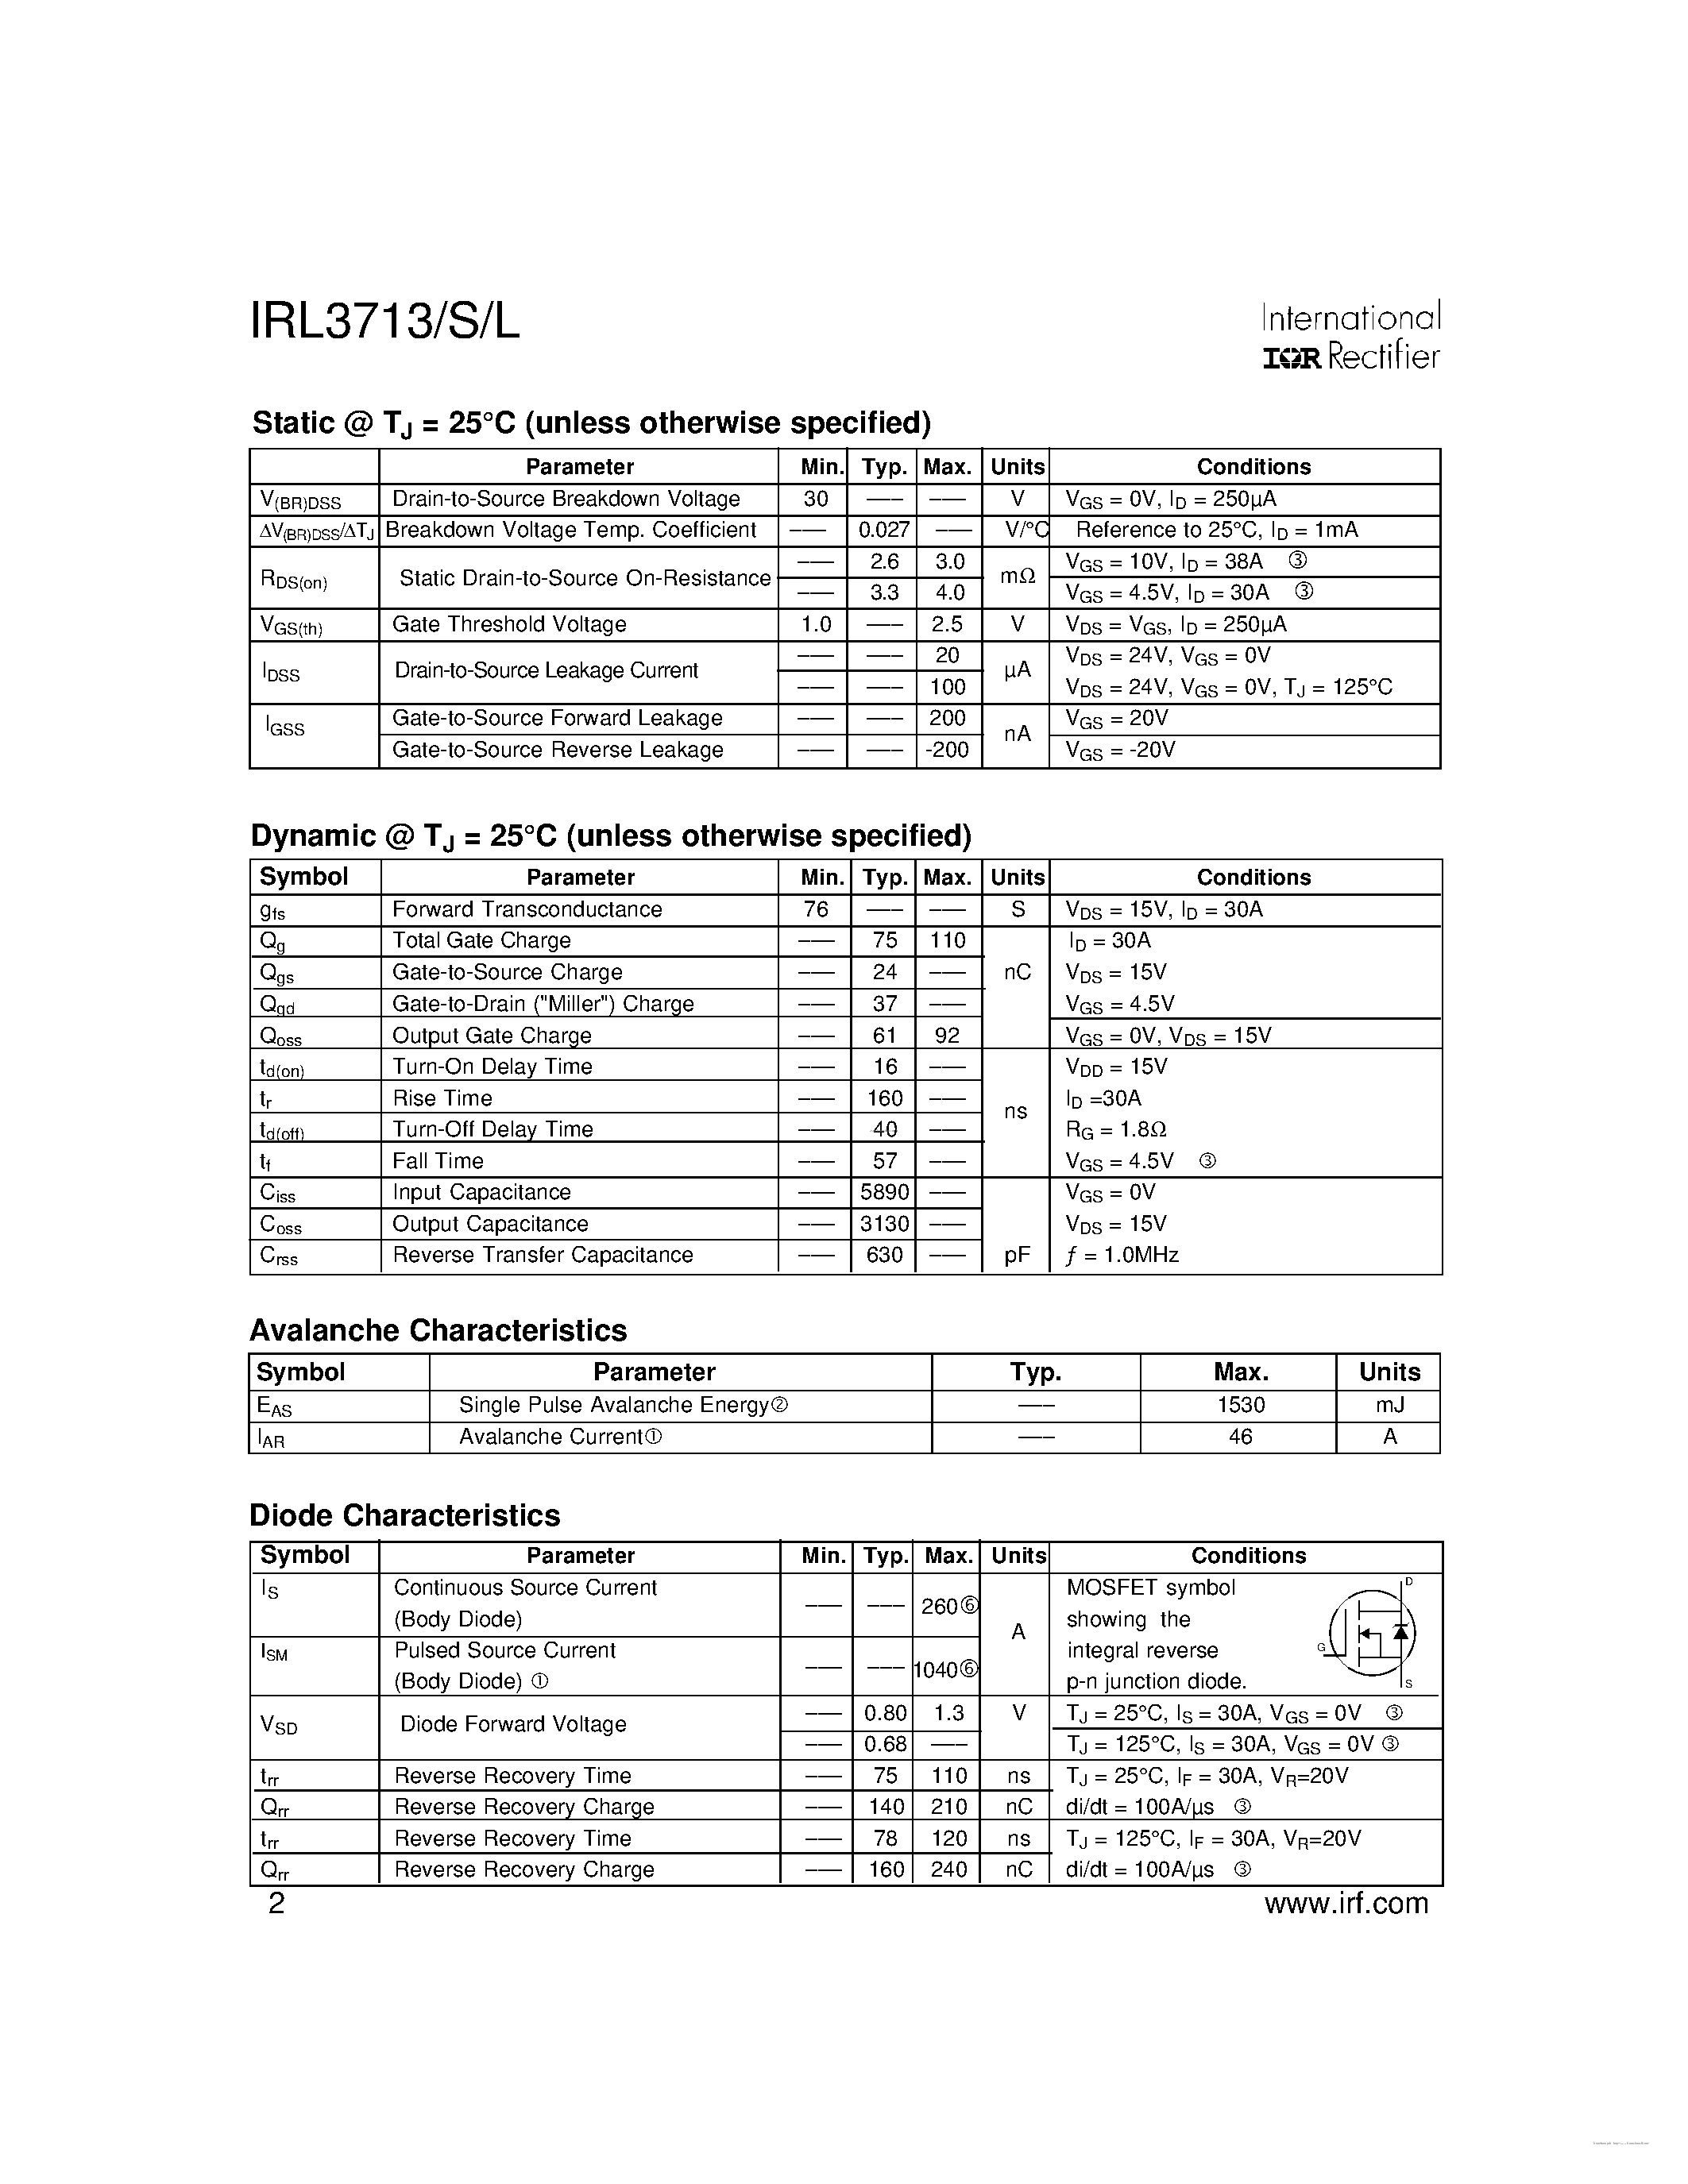 Datasheet L3713S - Search -----> IRL3713S page 2